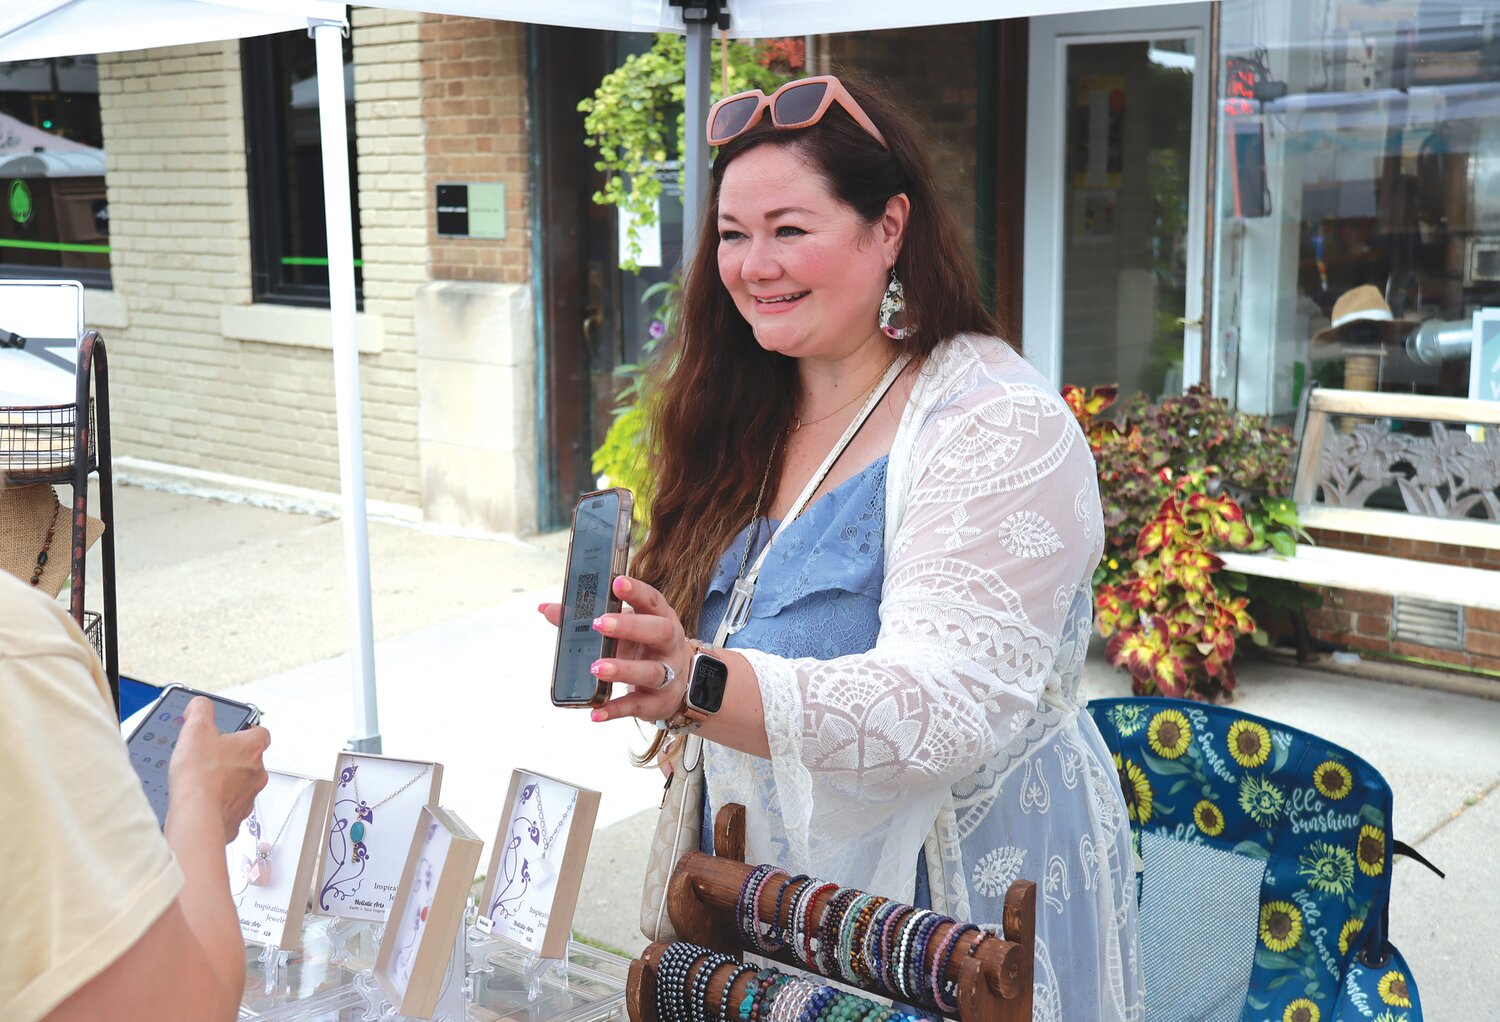 Christie Umboh was one of 50 vendors,  showcasing visual art to transformative holistic practices.